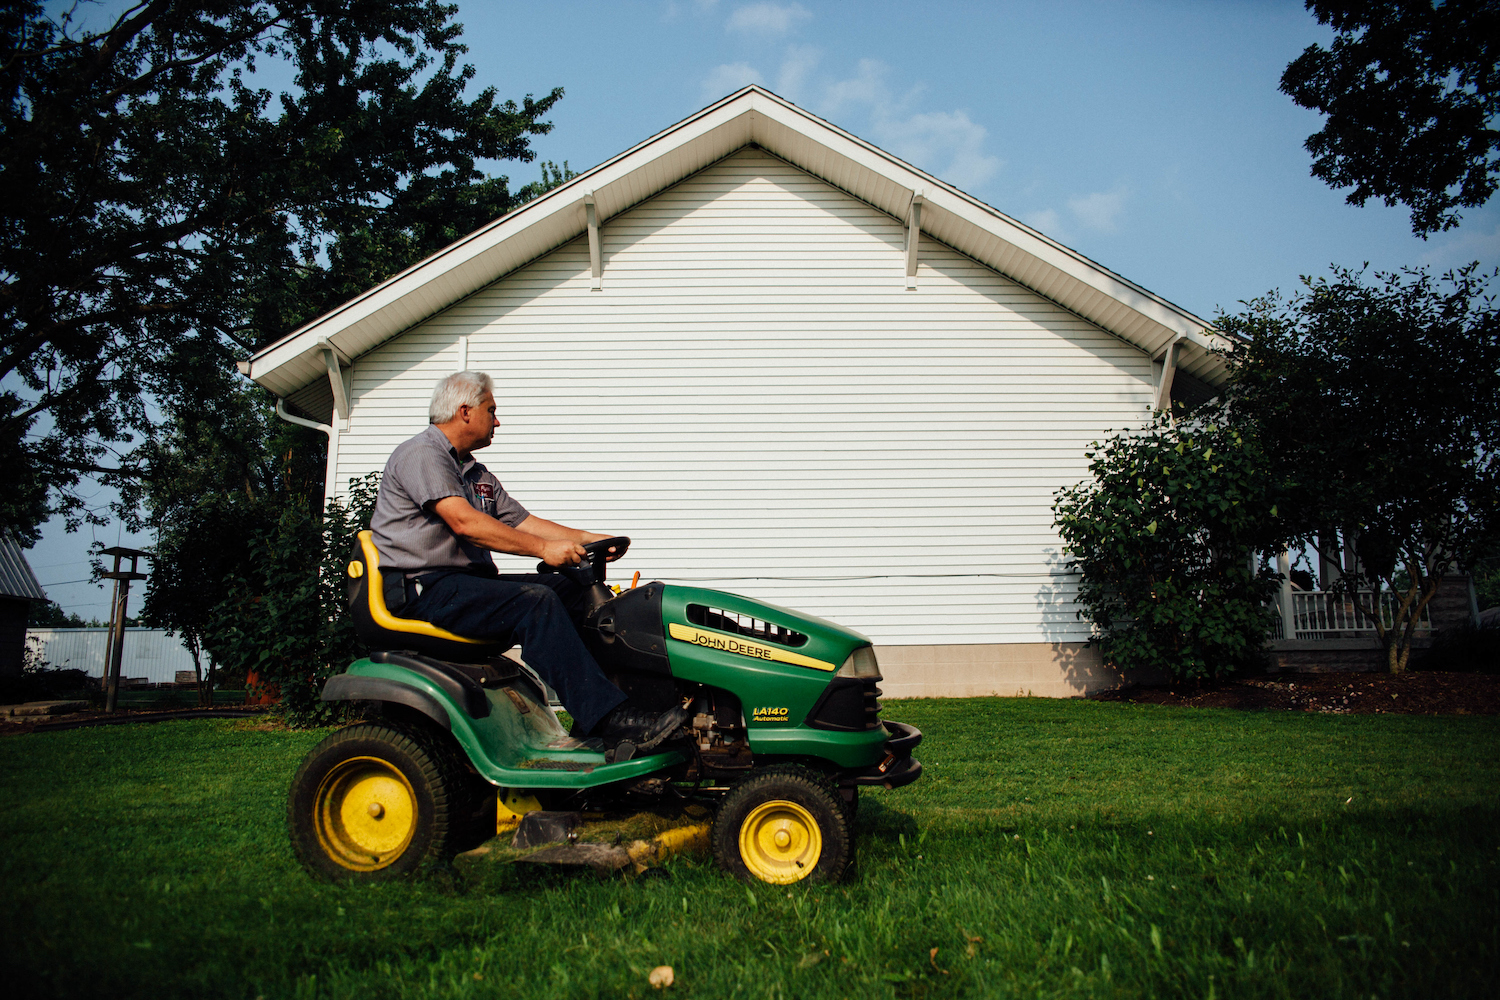 A man mowing a lawn on a riding lawn mower